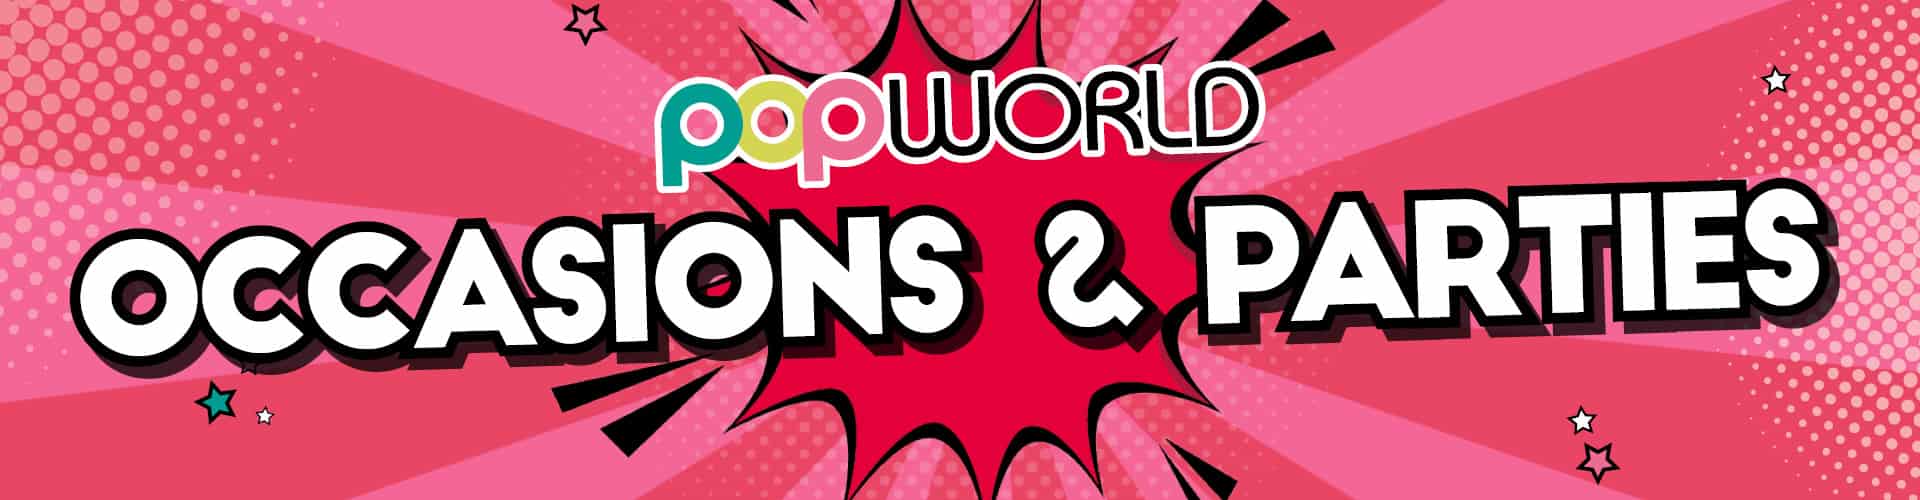 Occasions and Parties at Popworld Nuneaton